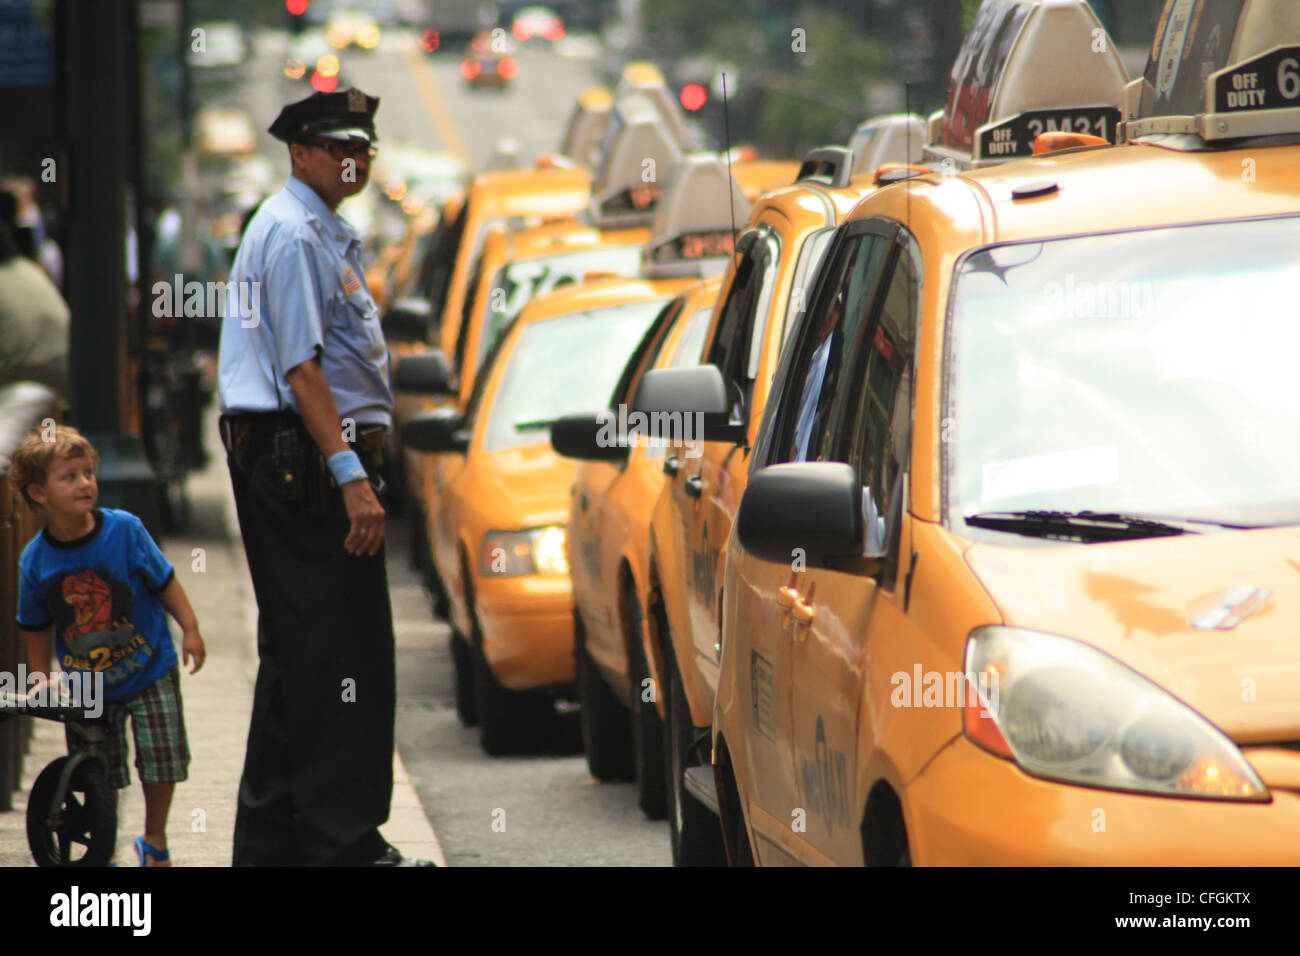 NYC taxi cabs Stock Photo